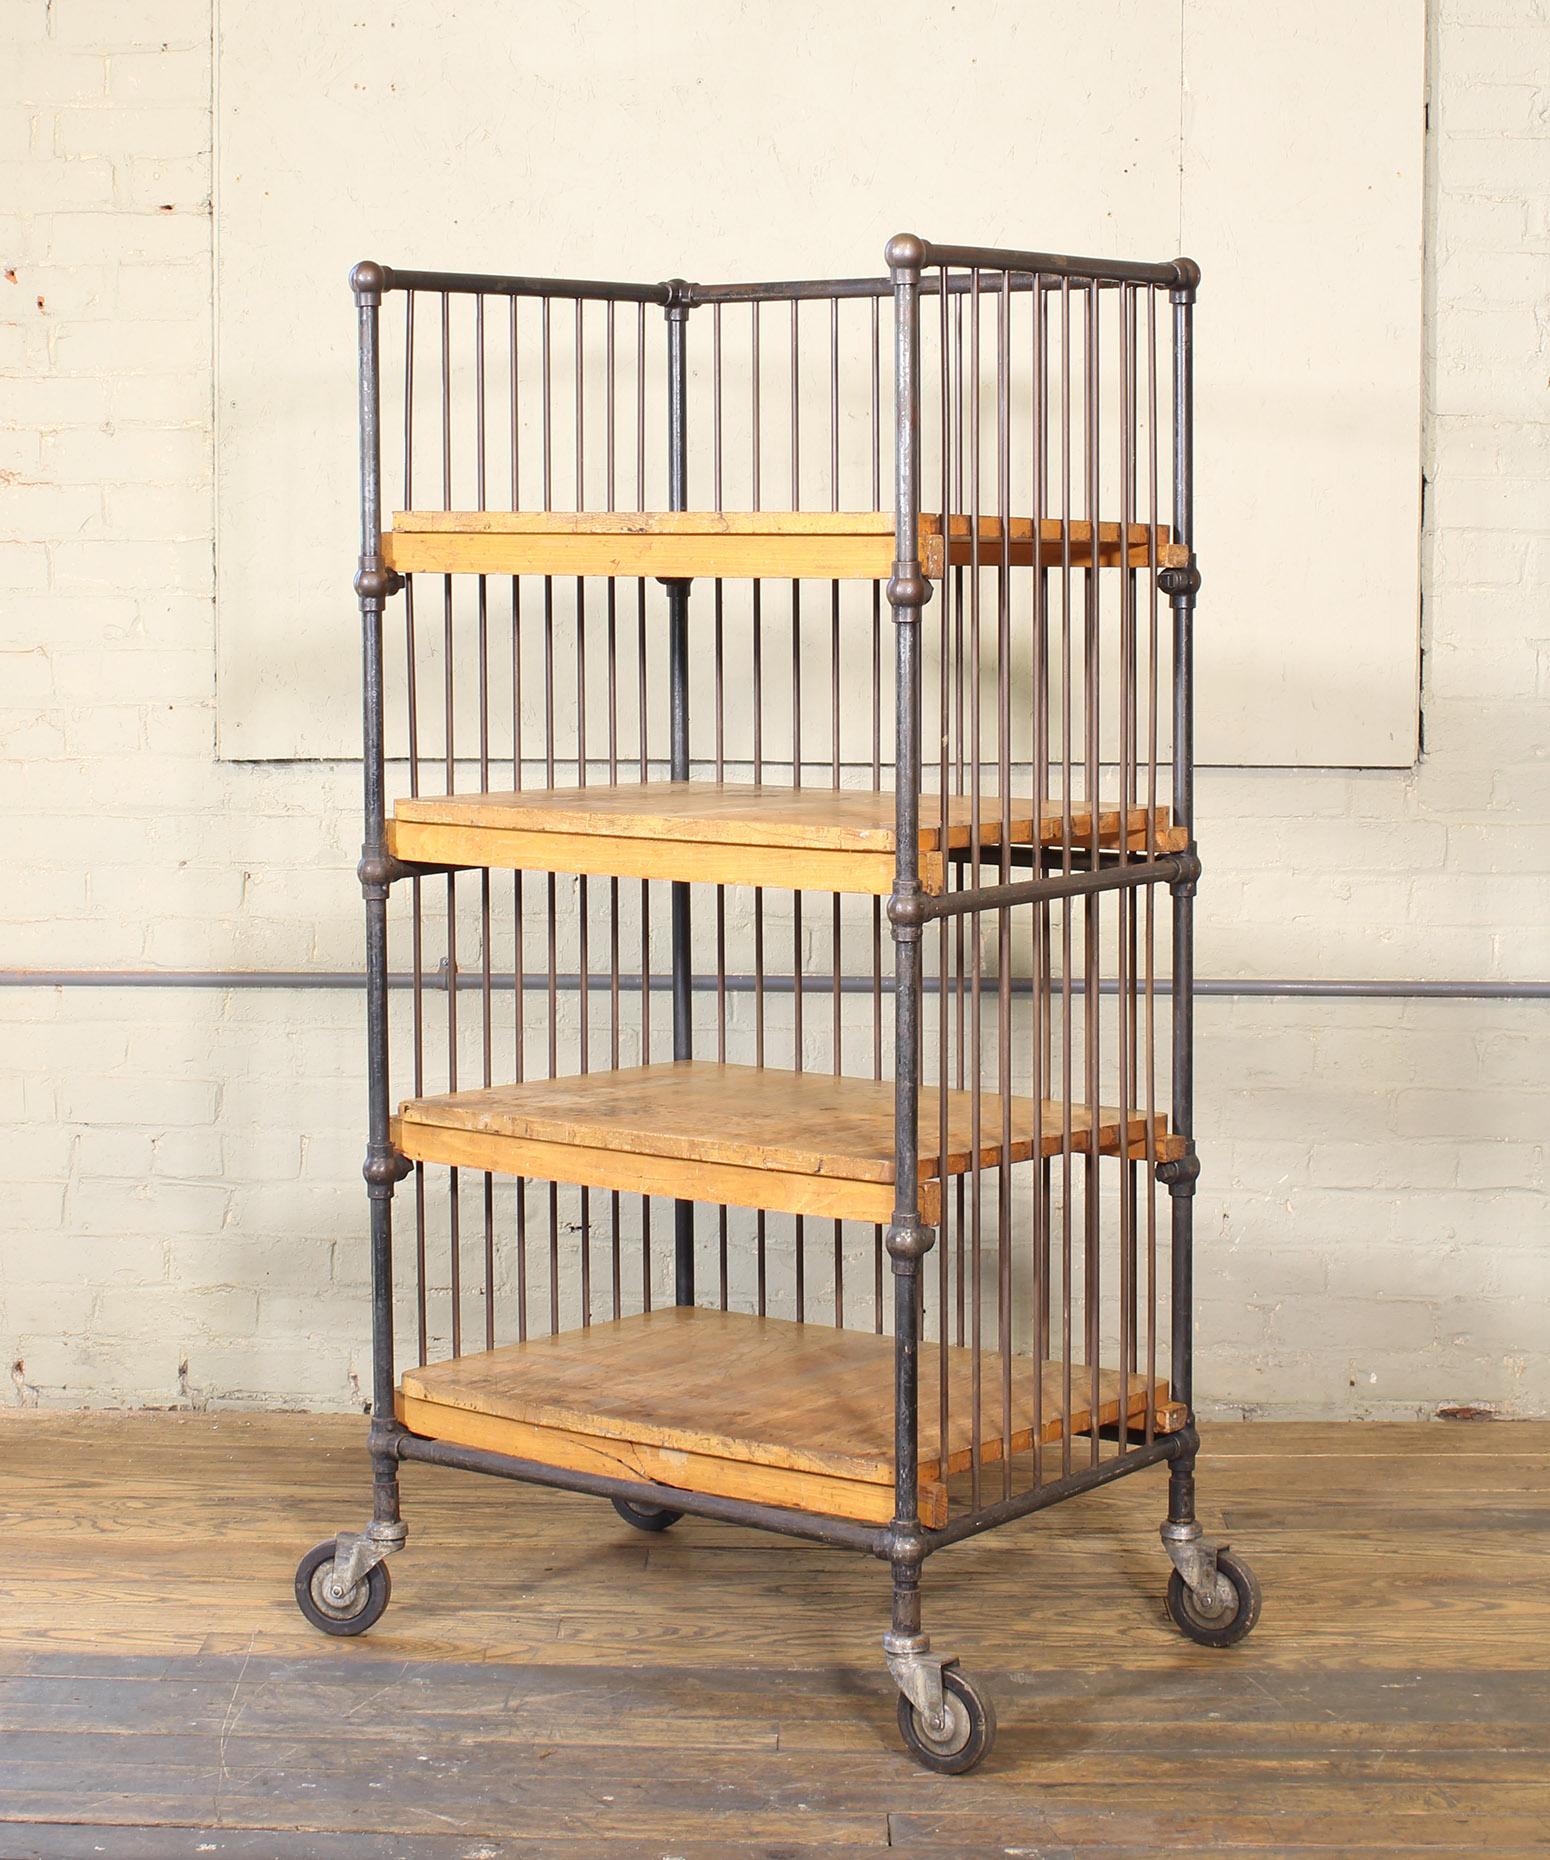 Authentic vintage four-shelf printers bindery rolling bar cart with bubble joints and swivel castors. Overall dimensions: 27 1/2